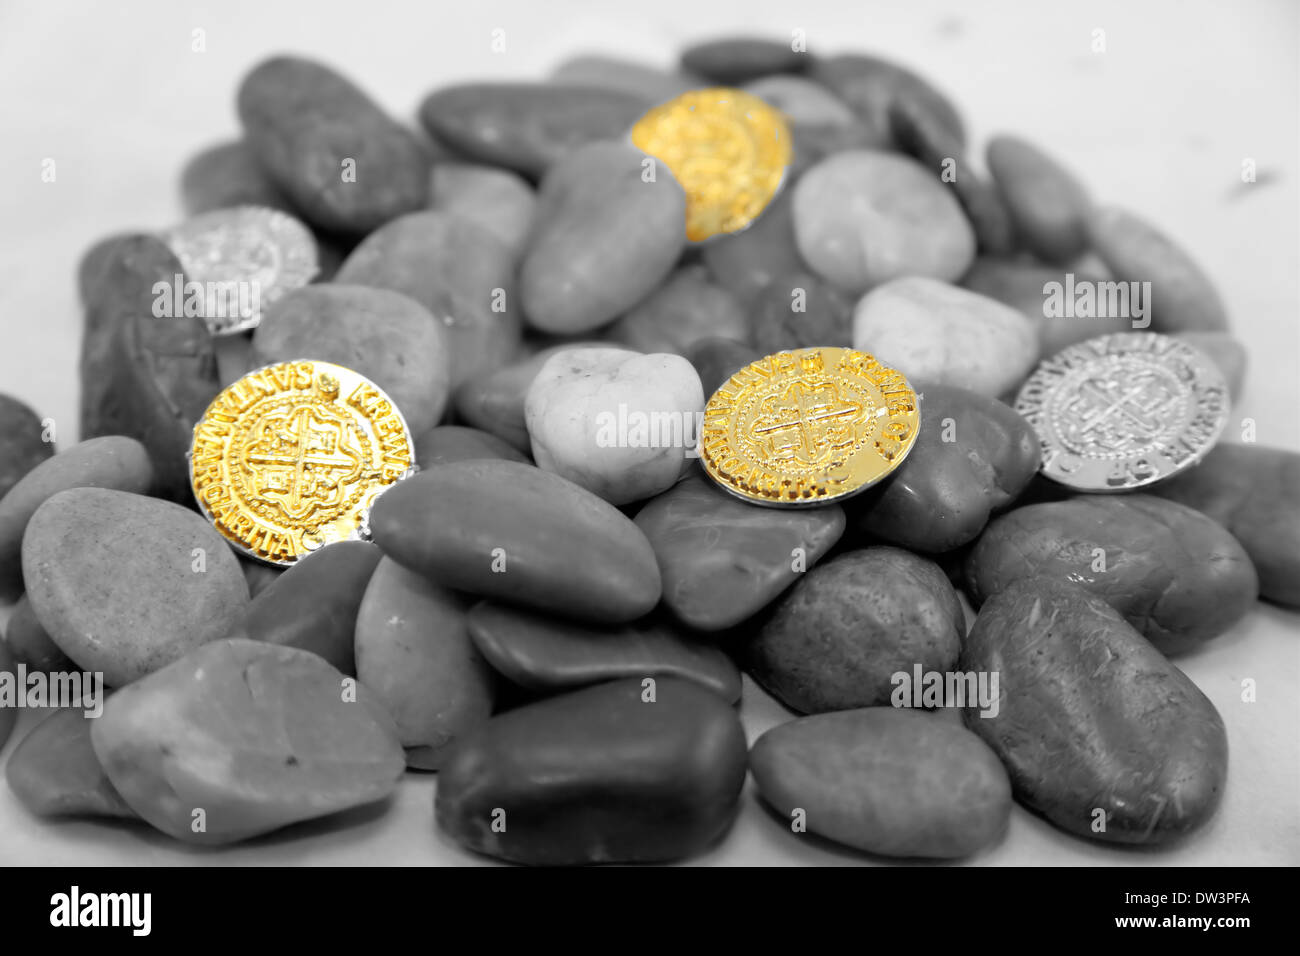 SPANISH OLD GOLD COINS ON MONOCHROME PICTURE.RIVER ROCKS Stock Photo